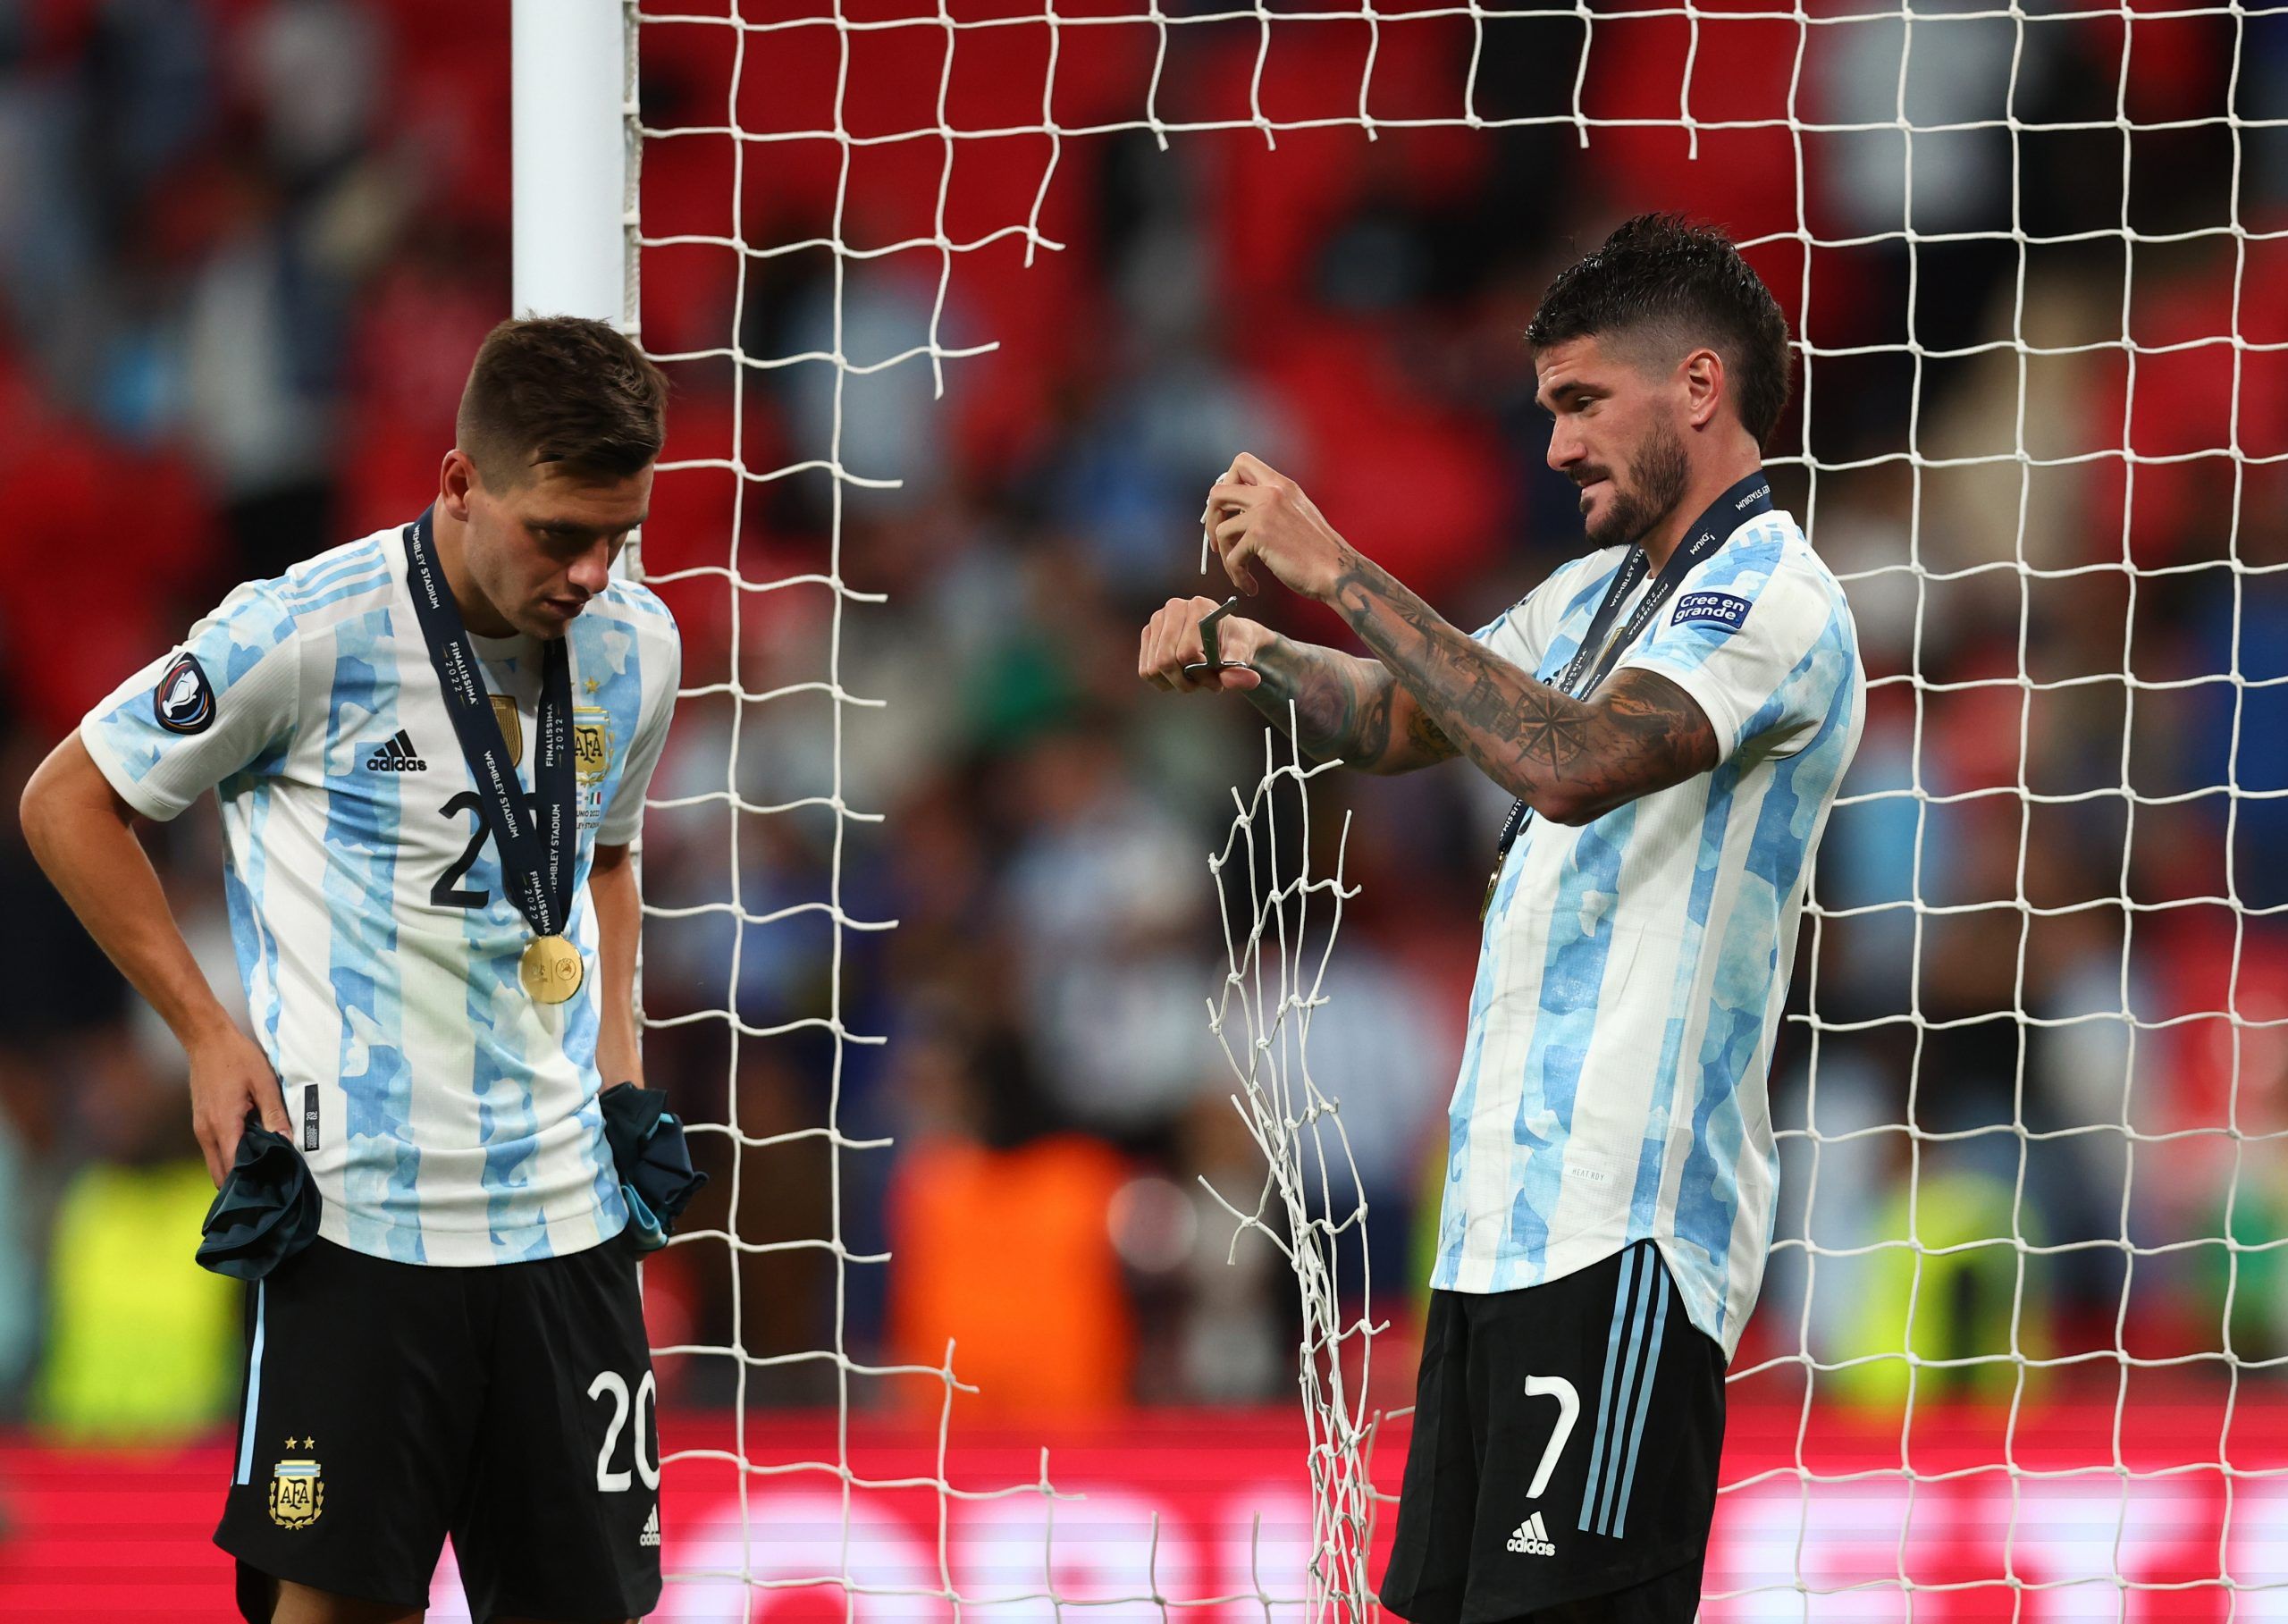 Soccer Football - Finalissima - Italy v Argentina - Wembley Stadium, London, Britain - June 1, 2022 Argentina's Giovani Lo Celso and Rodrigo De Paul cut the net after the match REUTERS/David Klein